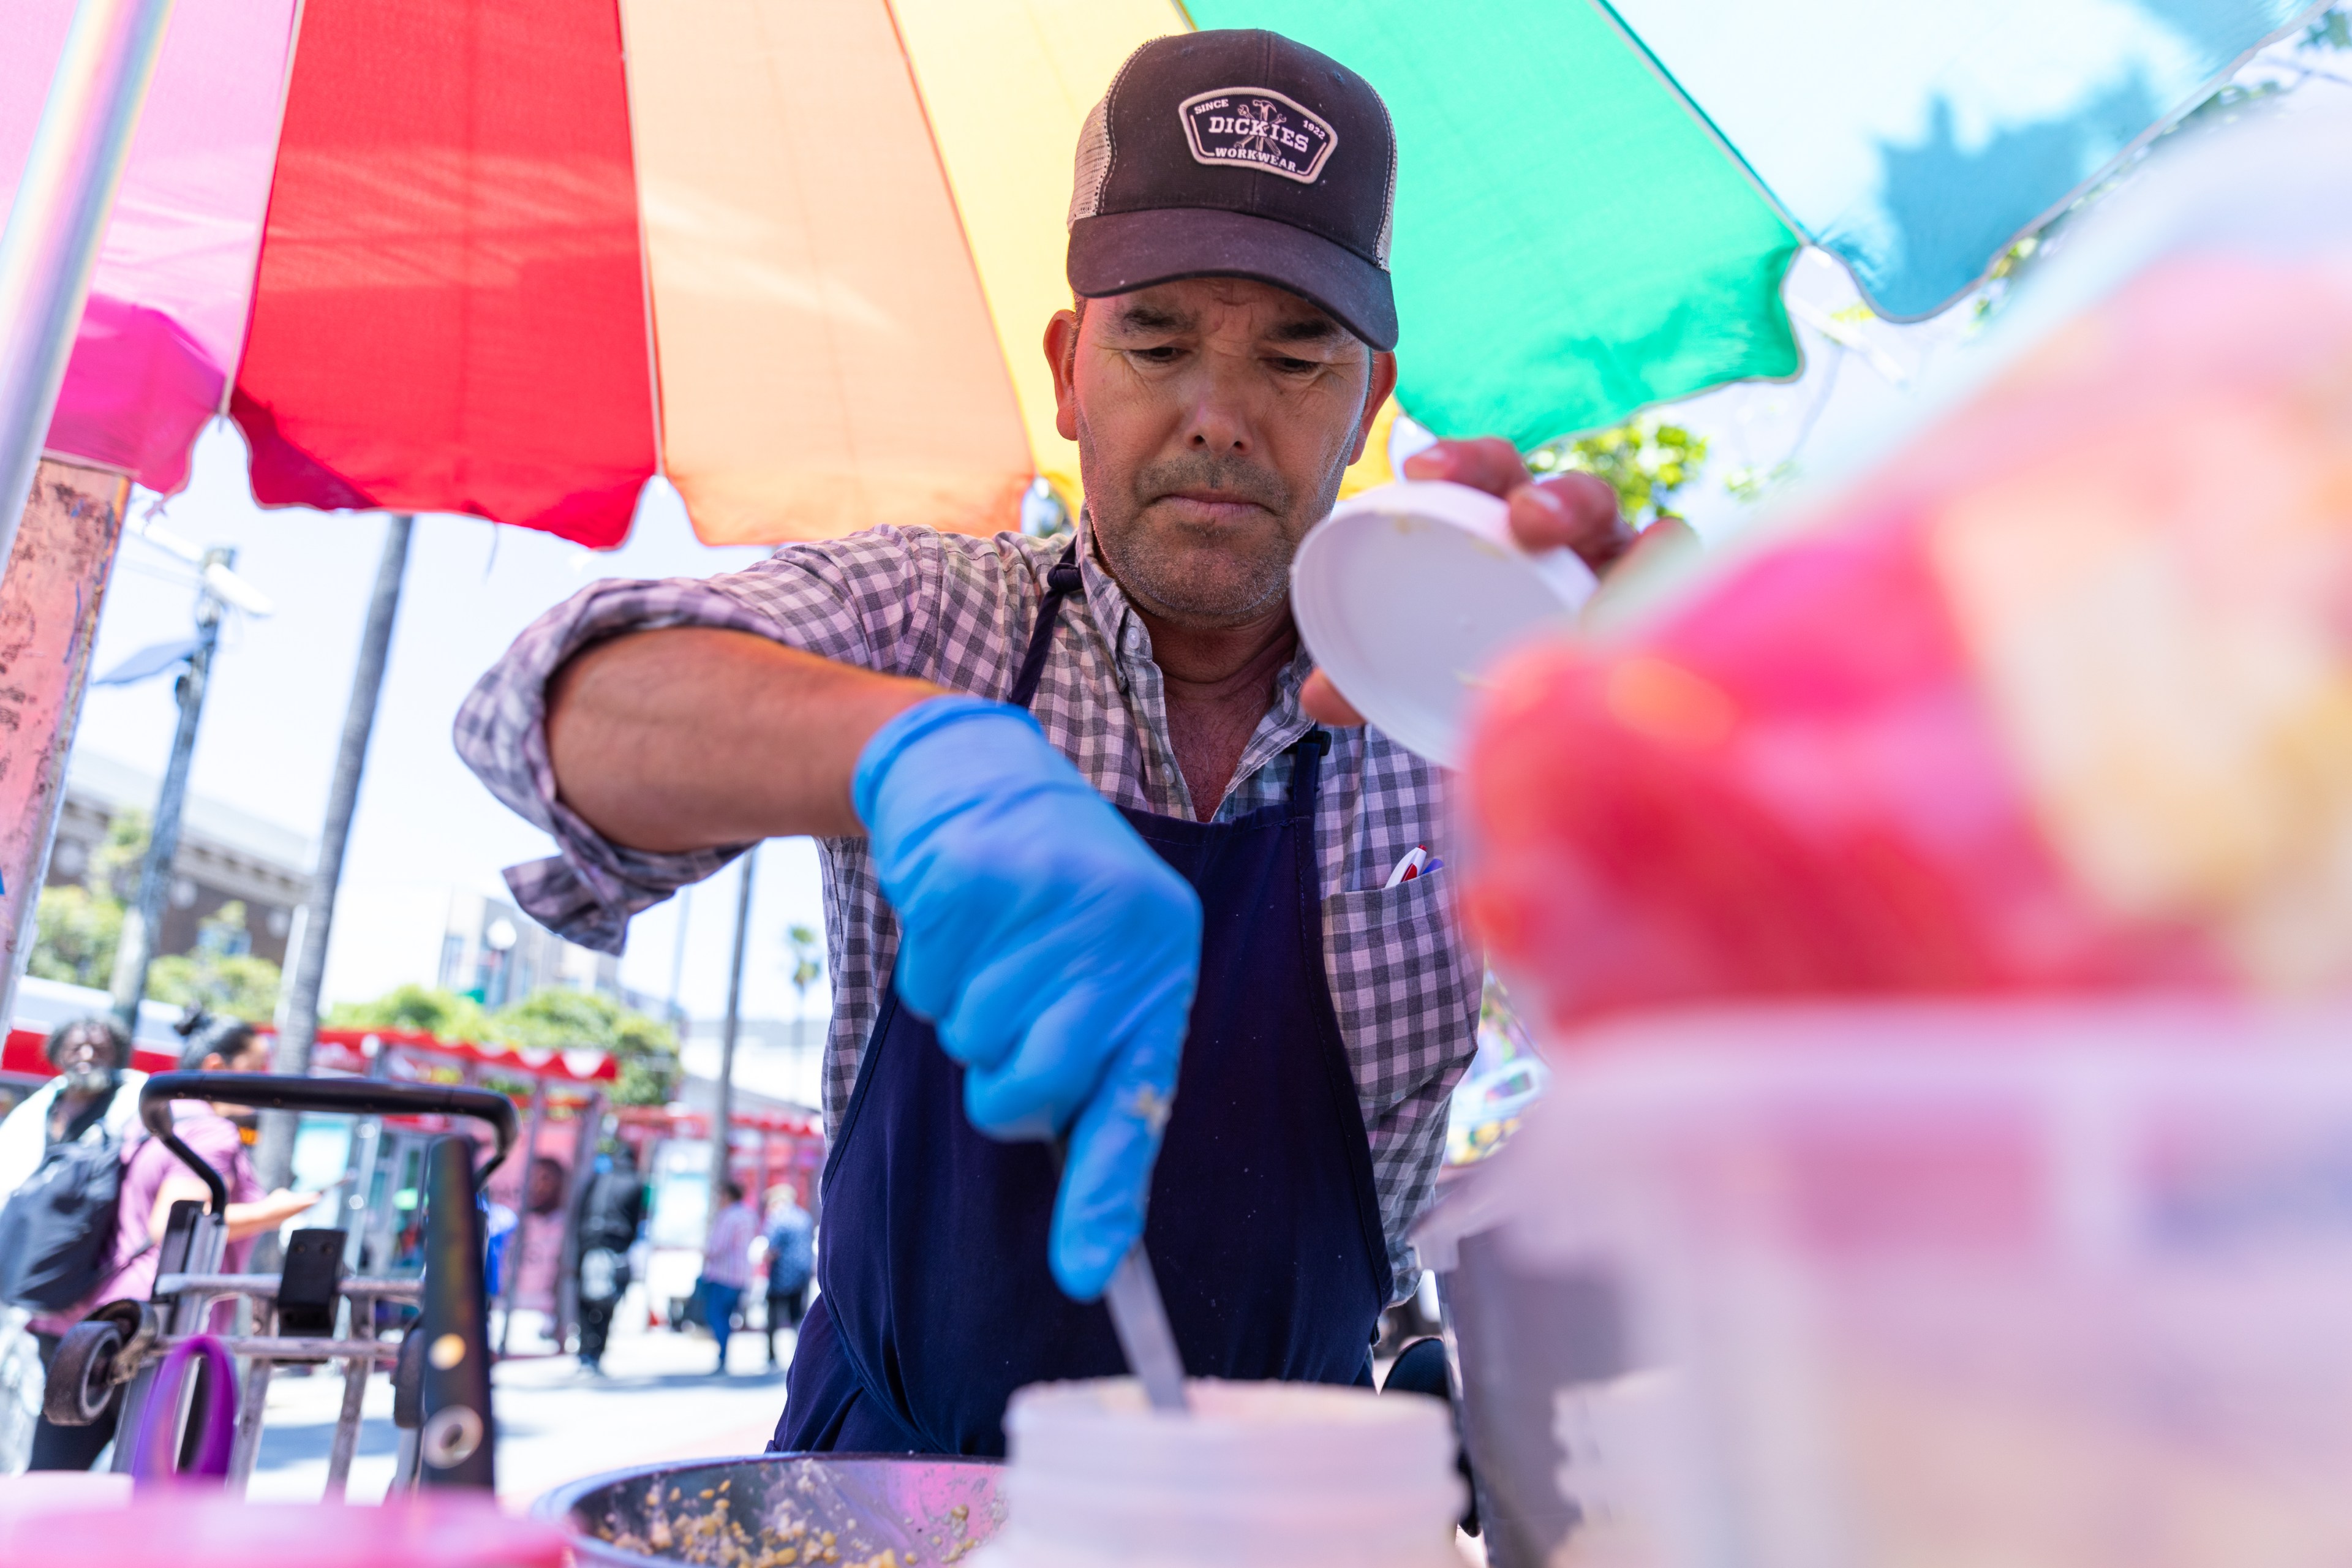 A man wearing a checkered shirt, blue apron, and gloves is preparing food under a brightly colored umbrella at an outdoor market or street fair.